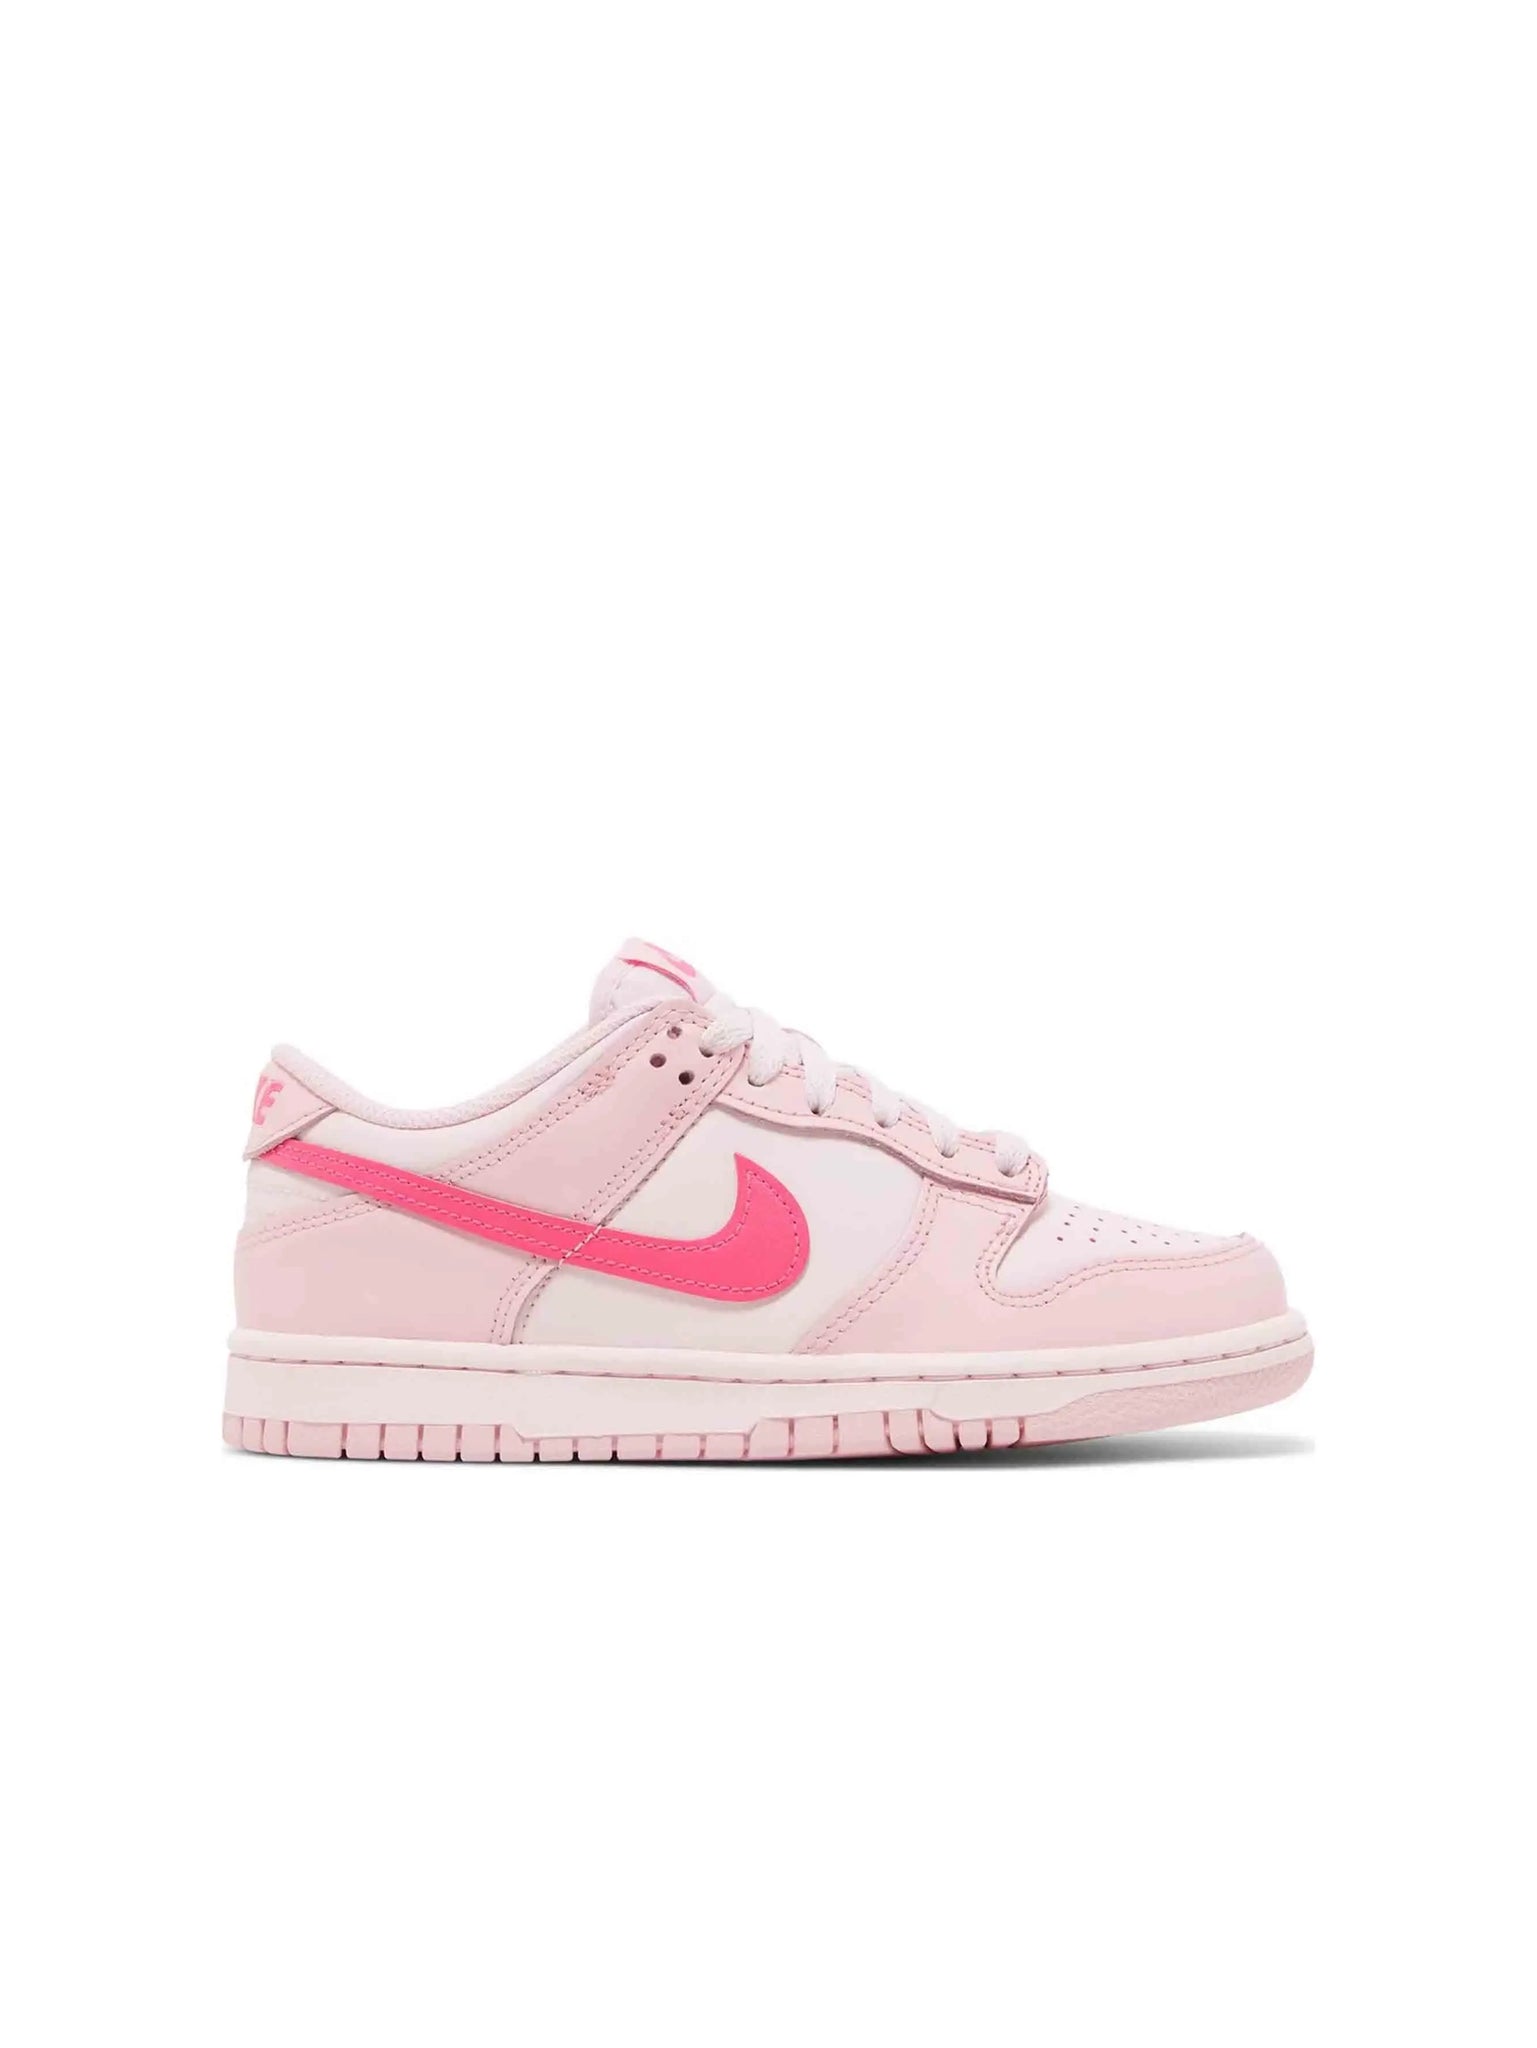 Nike Dunk Low Triple Pink (GS) - Prior